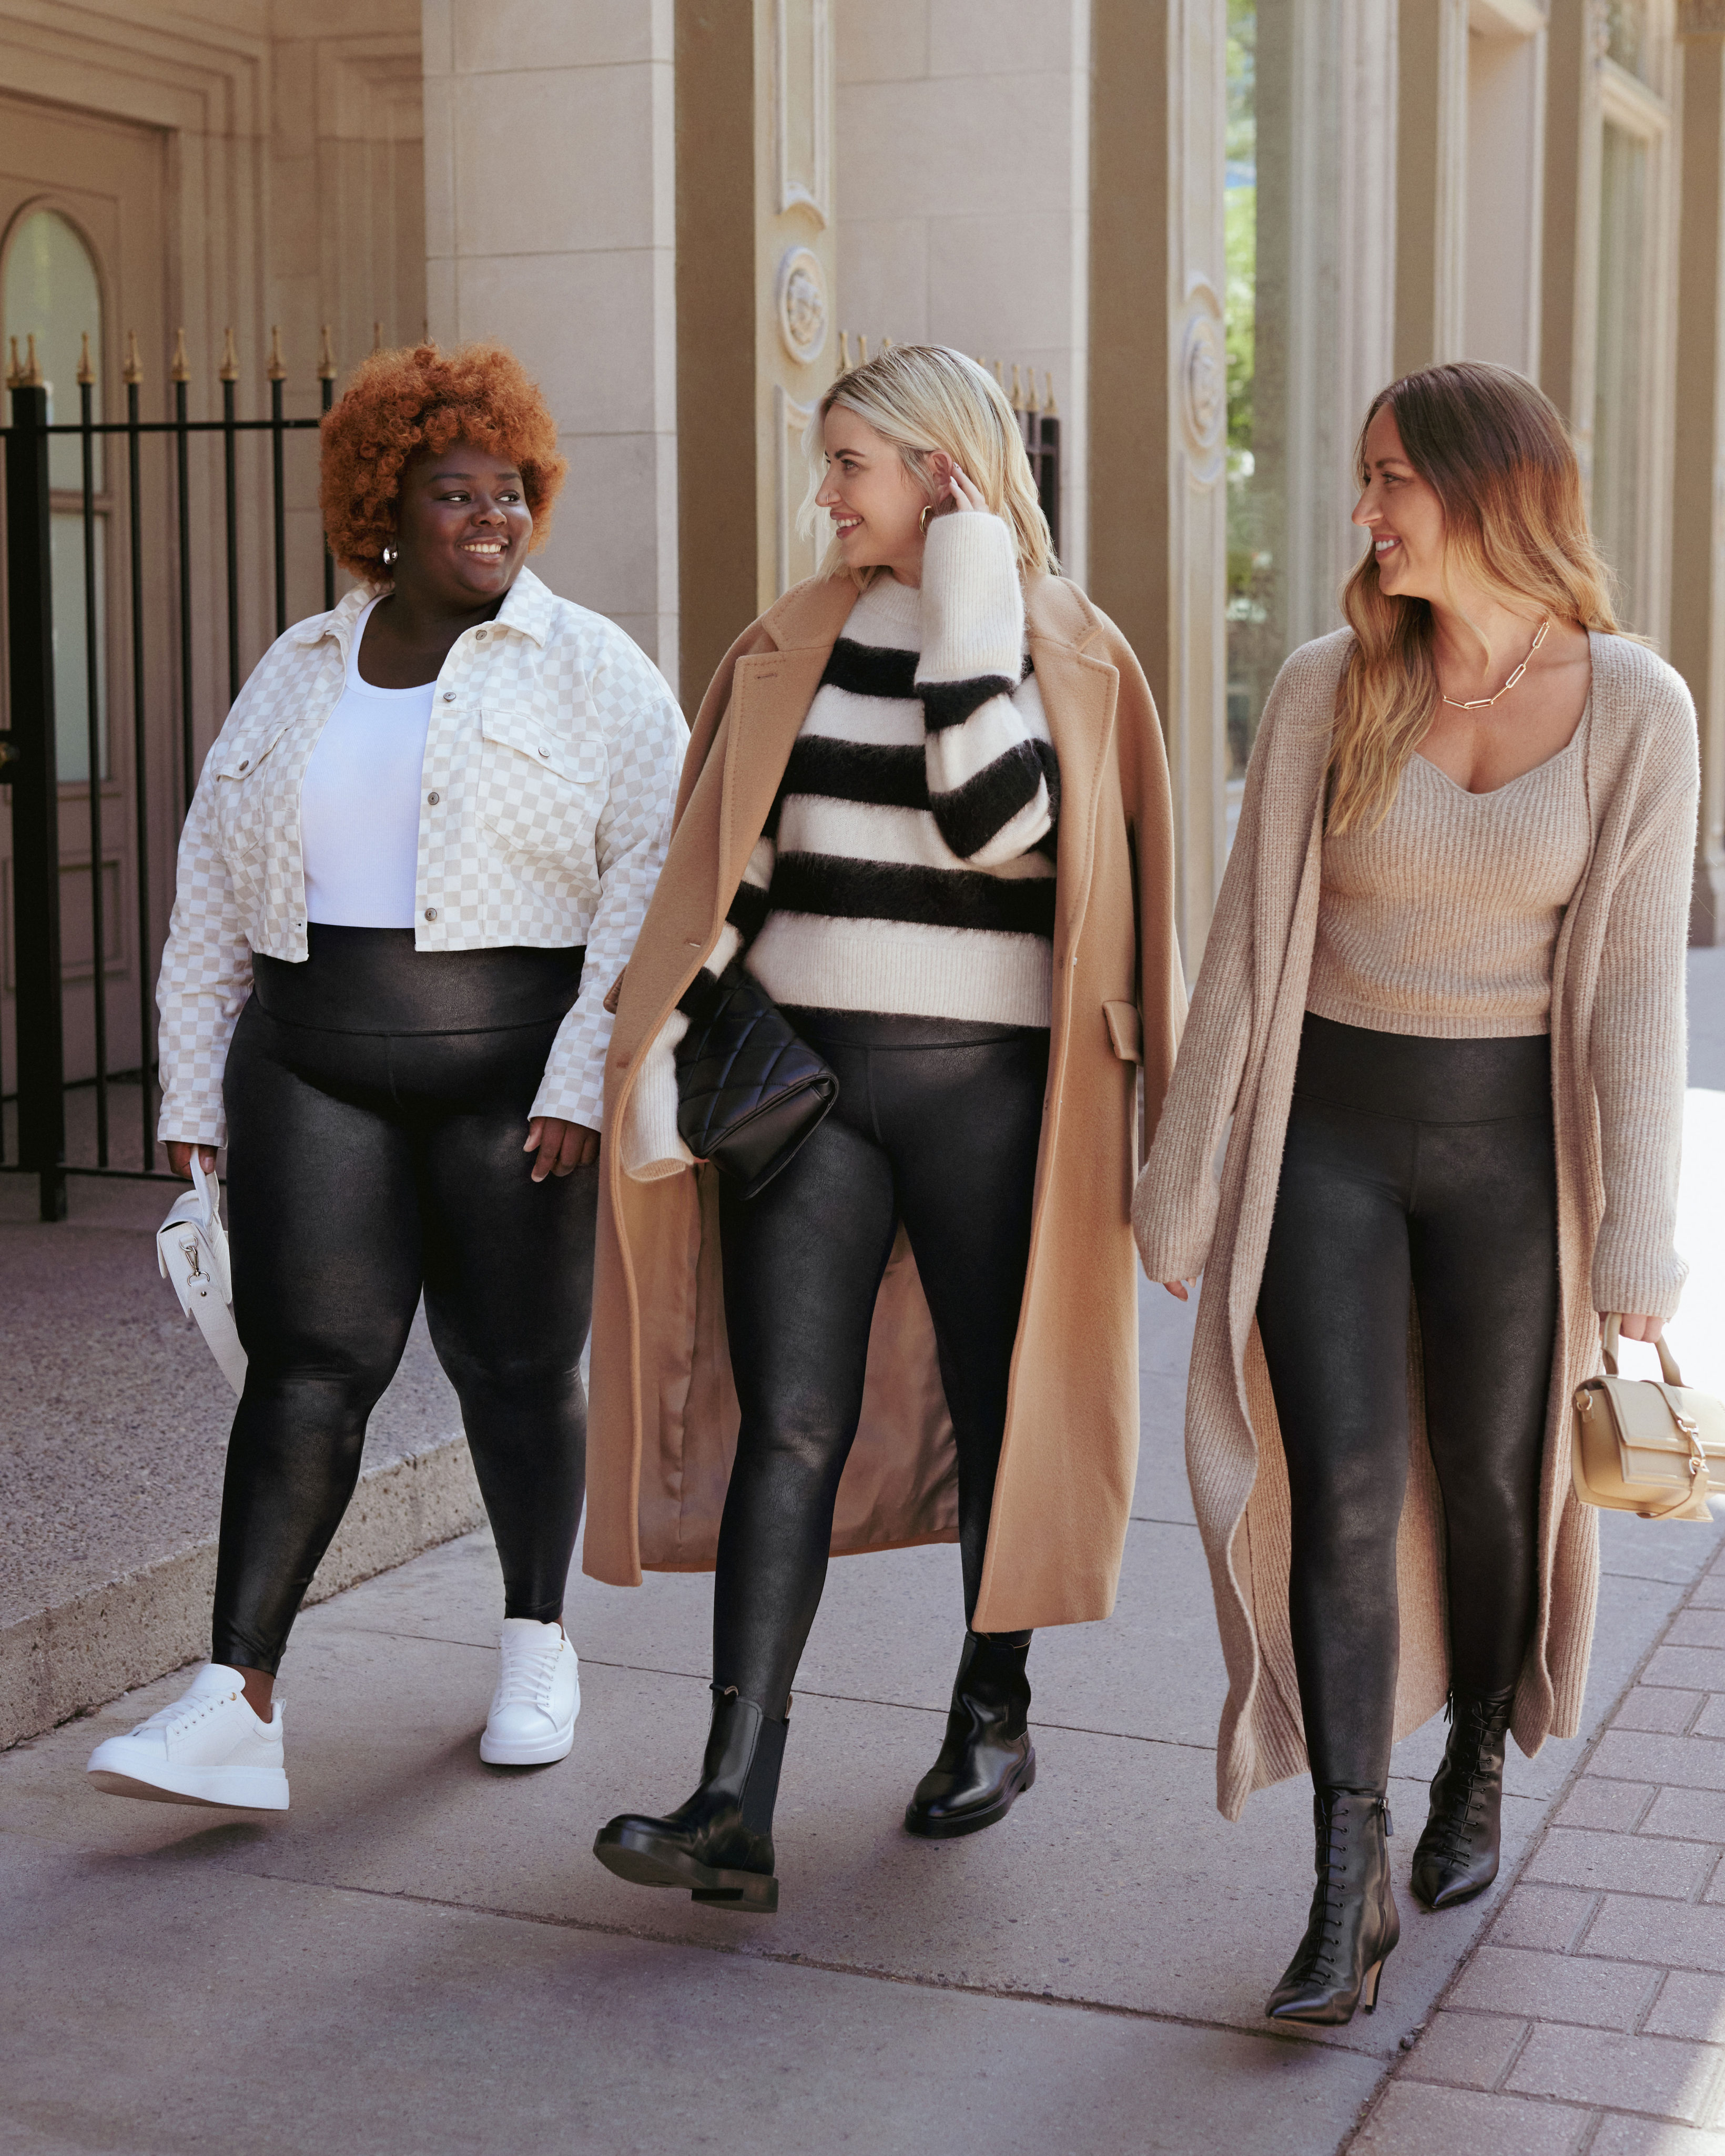 The Knix x The Birds Papaya Leggings Are Back + Other Fashion News